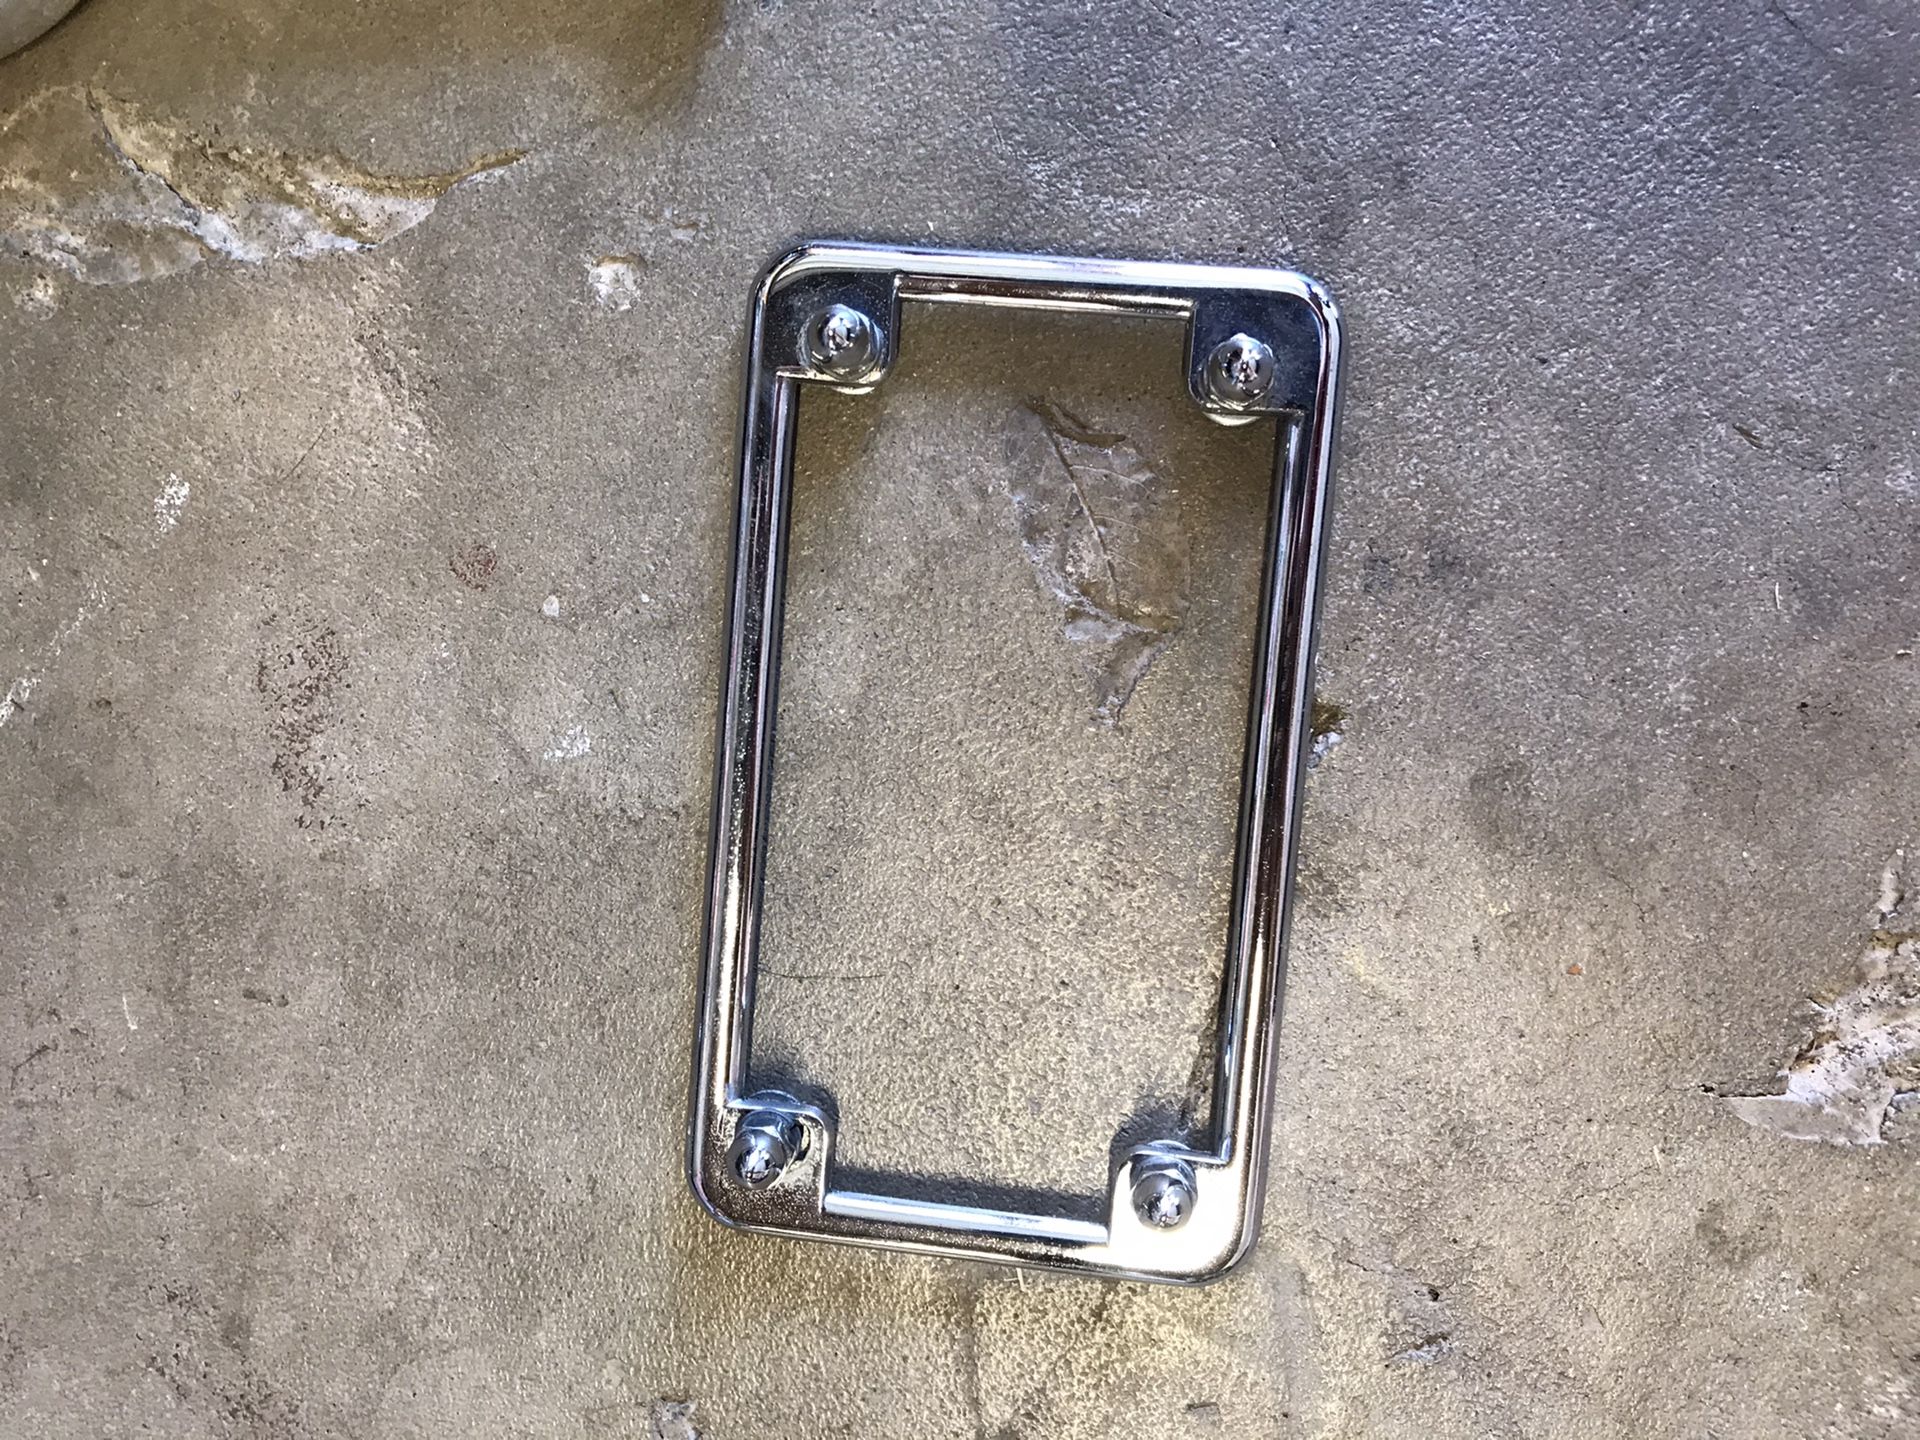 Motorcycle license plate frame